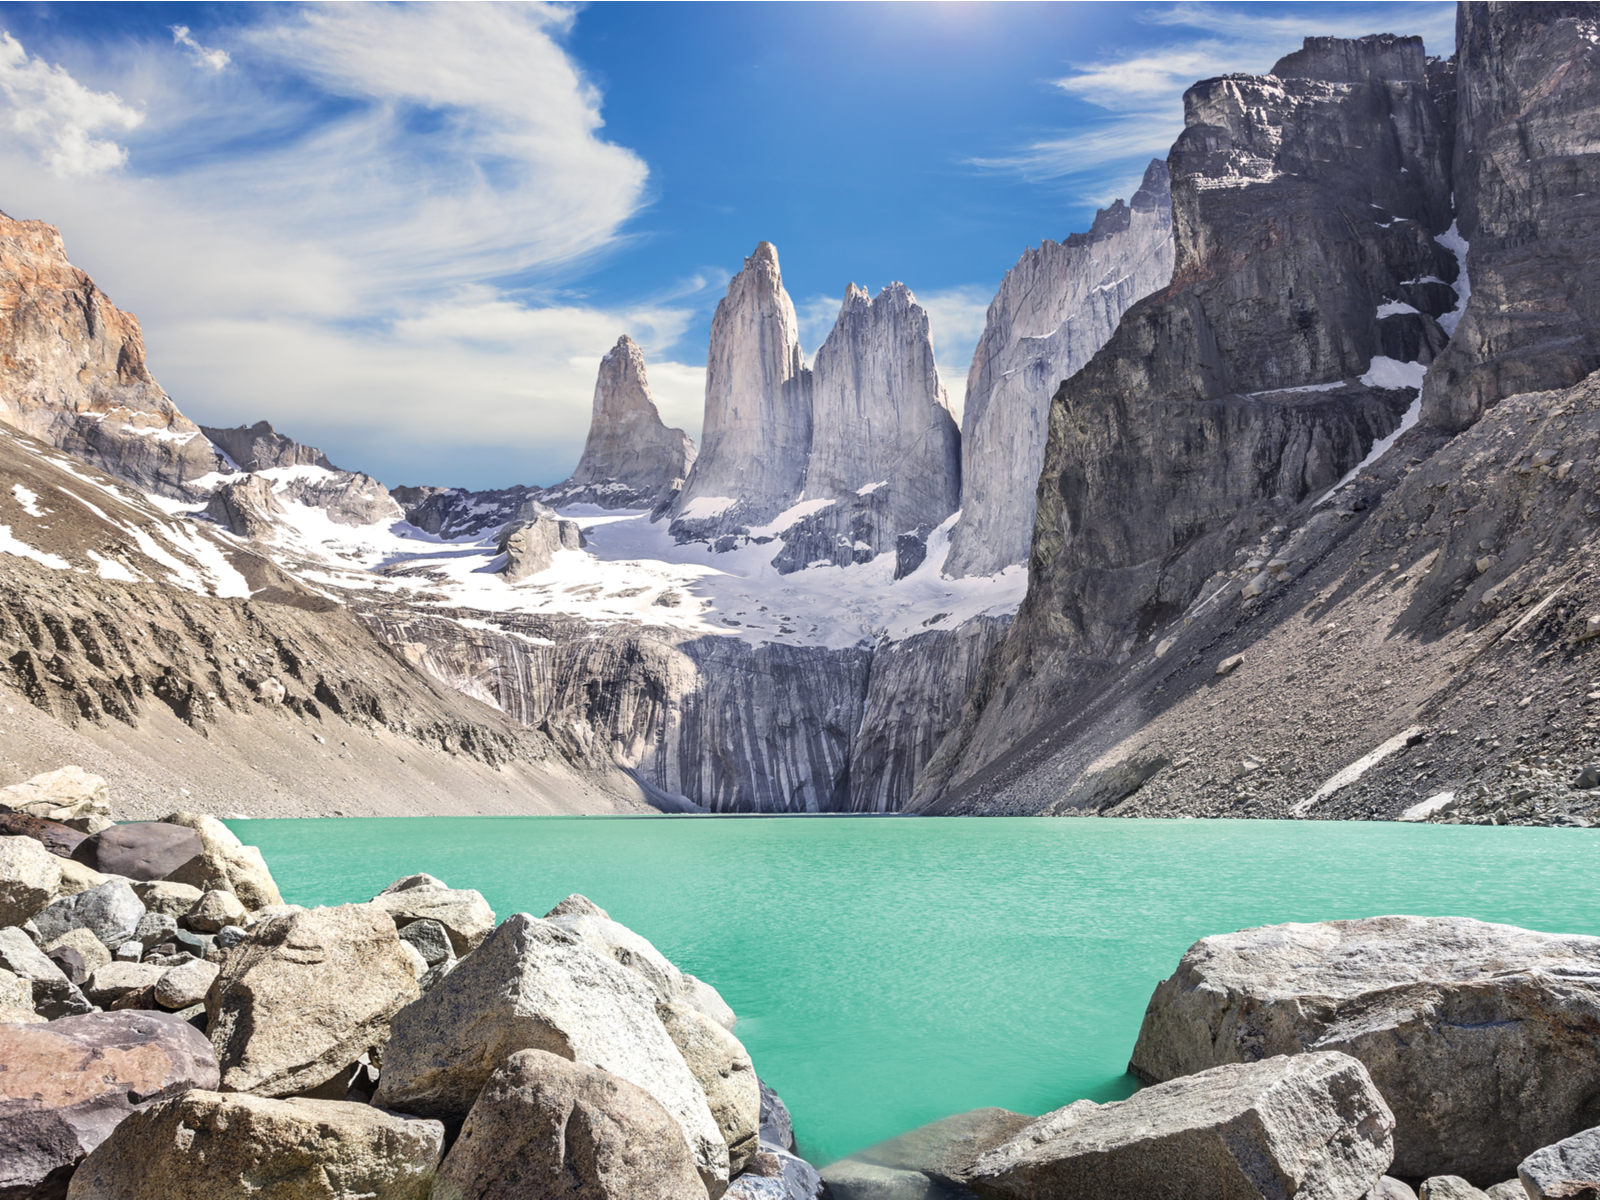 Torres Del Paine Mountain Range pictured during the Winter, the worst time to visit Chile, because of the cold and snow